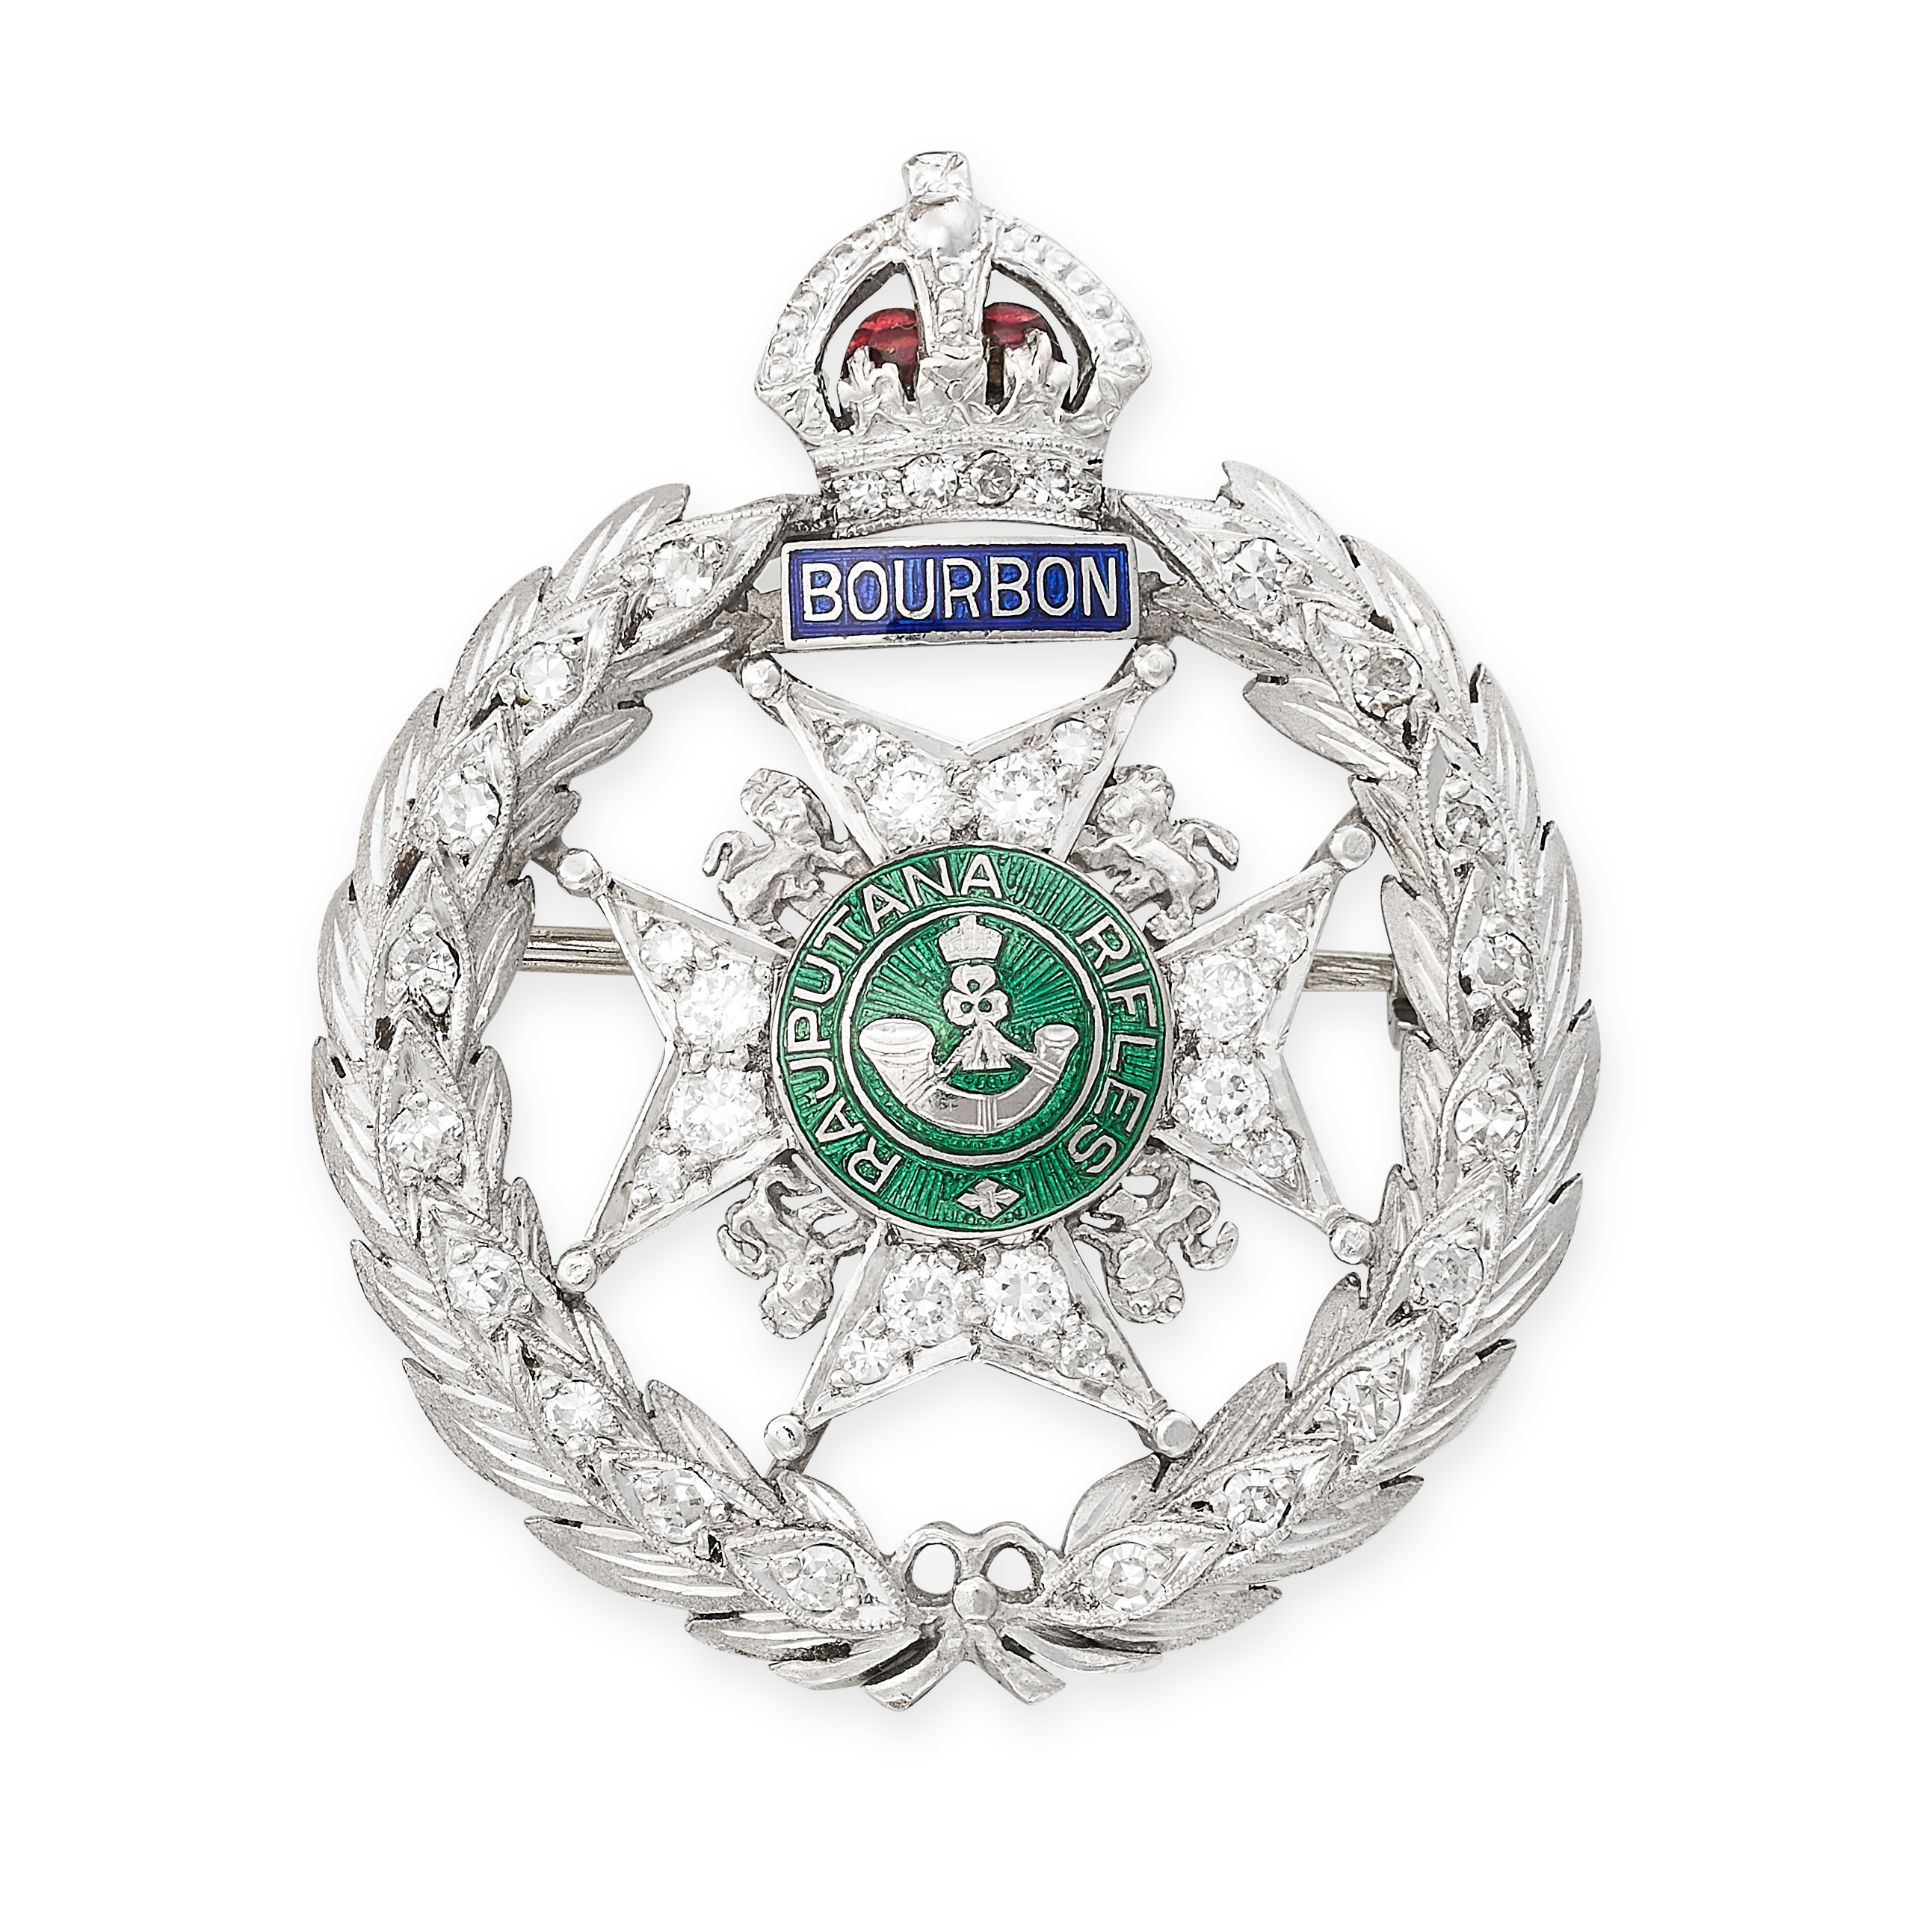 A DIAMOND AND ENAMEL REGIMENTAL BROOCH / BADGE CAP for the Rajputana Rifles, relieved in green, blue